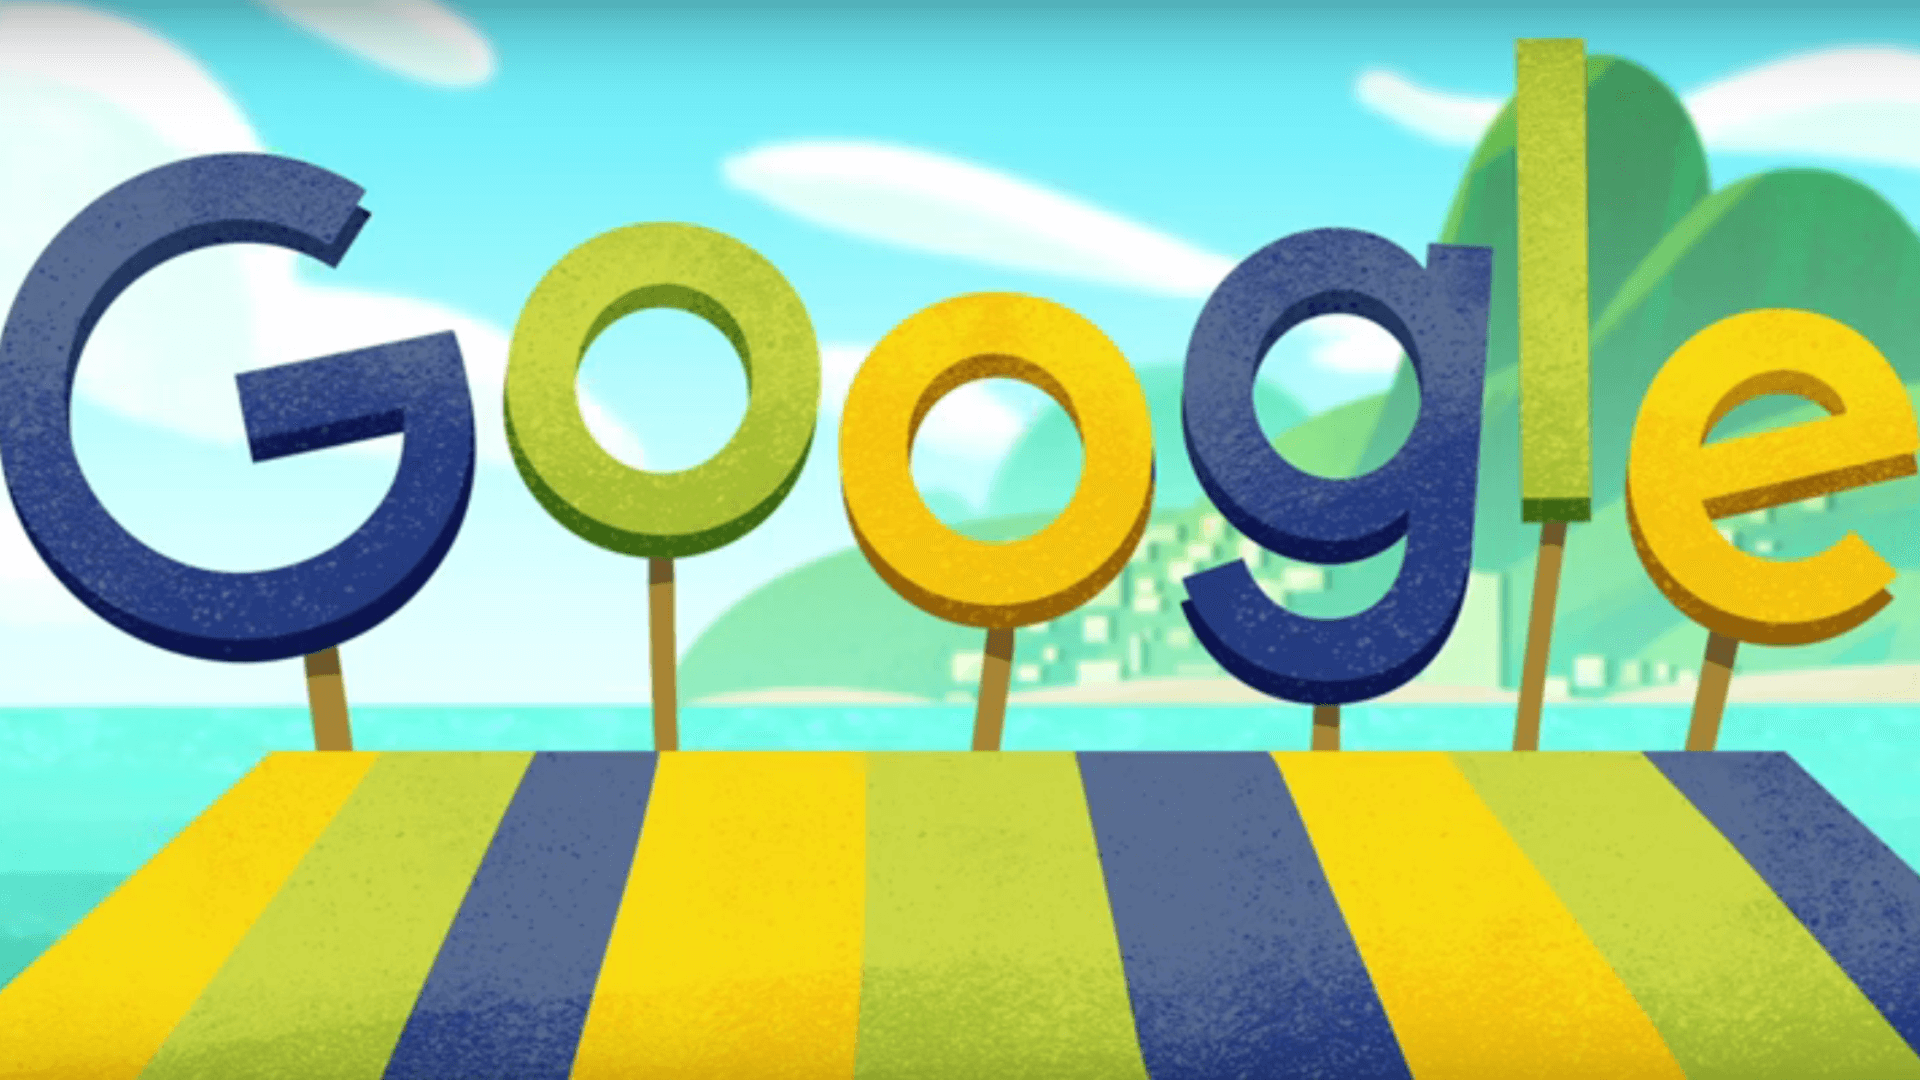 Olympic Google Logo - 17 days of 2016 Rio Olympic Google Doodles: a full list of Google's ...